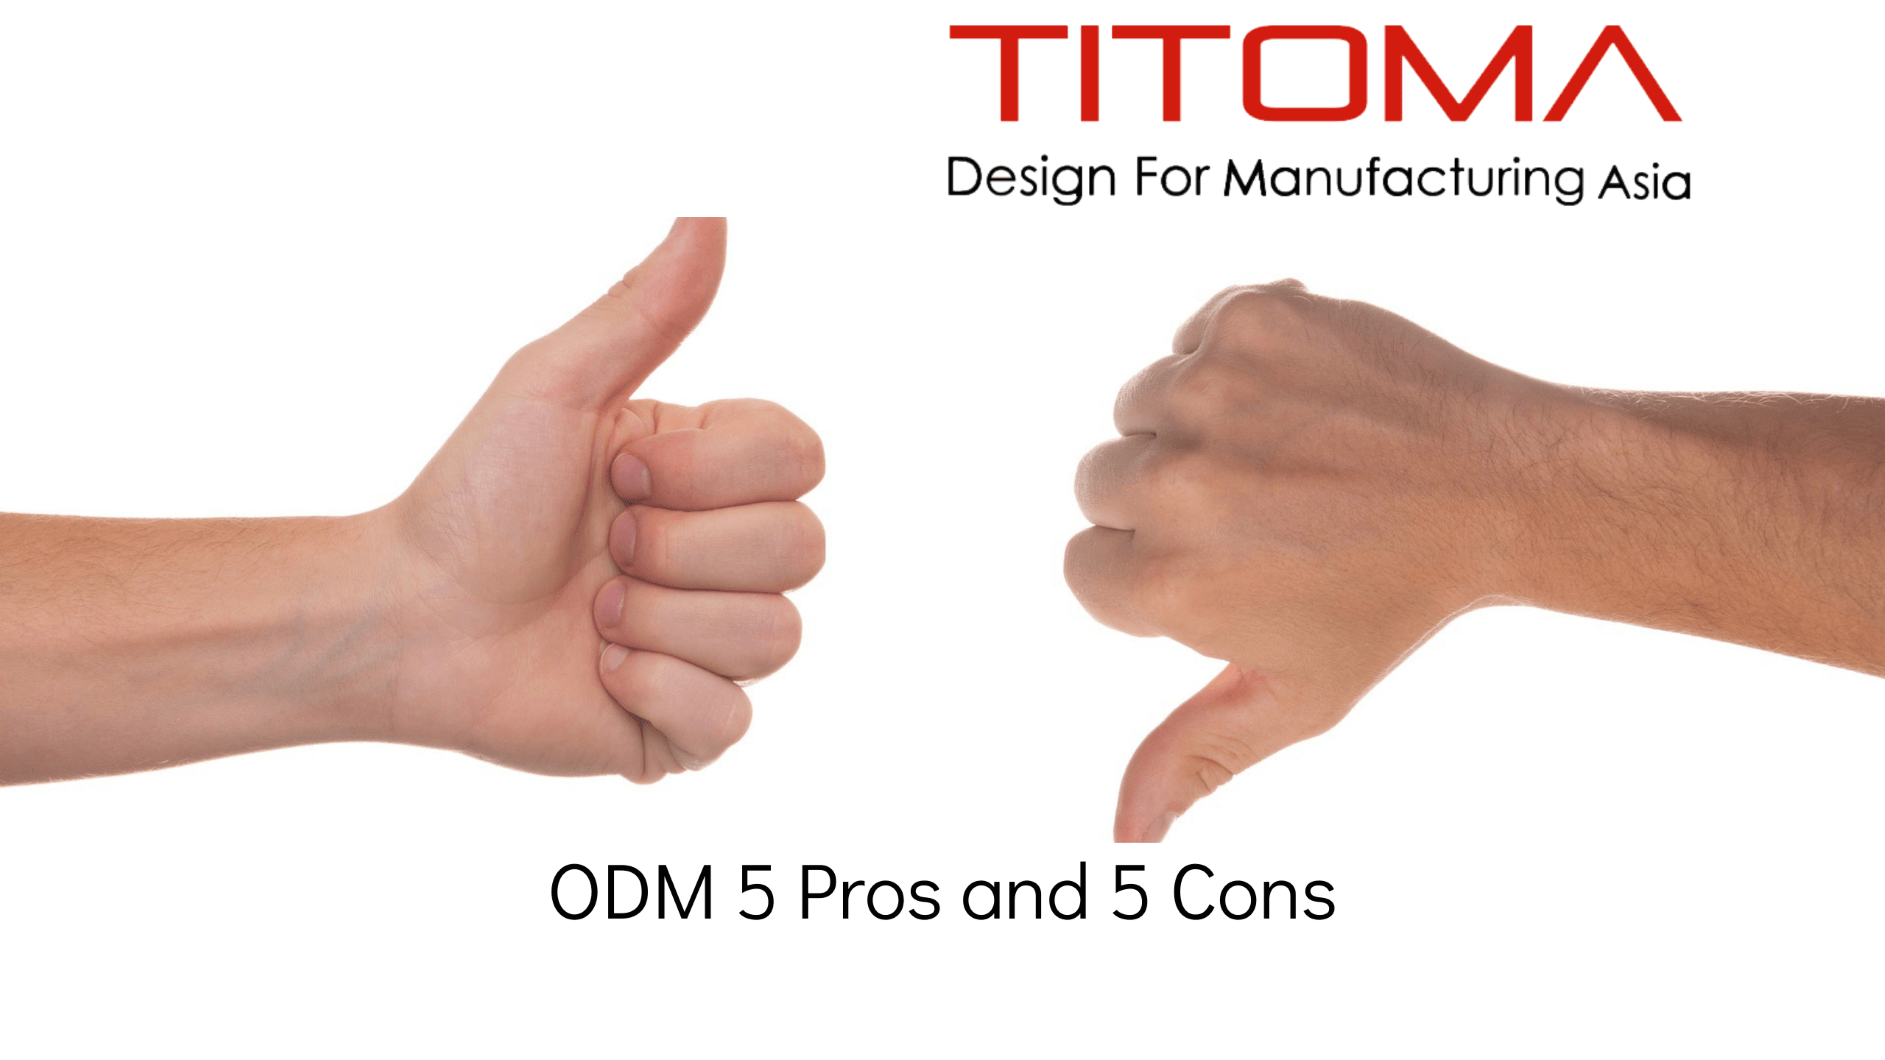 ODM Pros and Cons